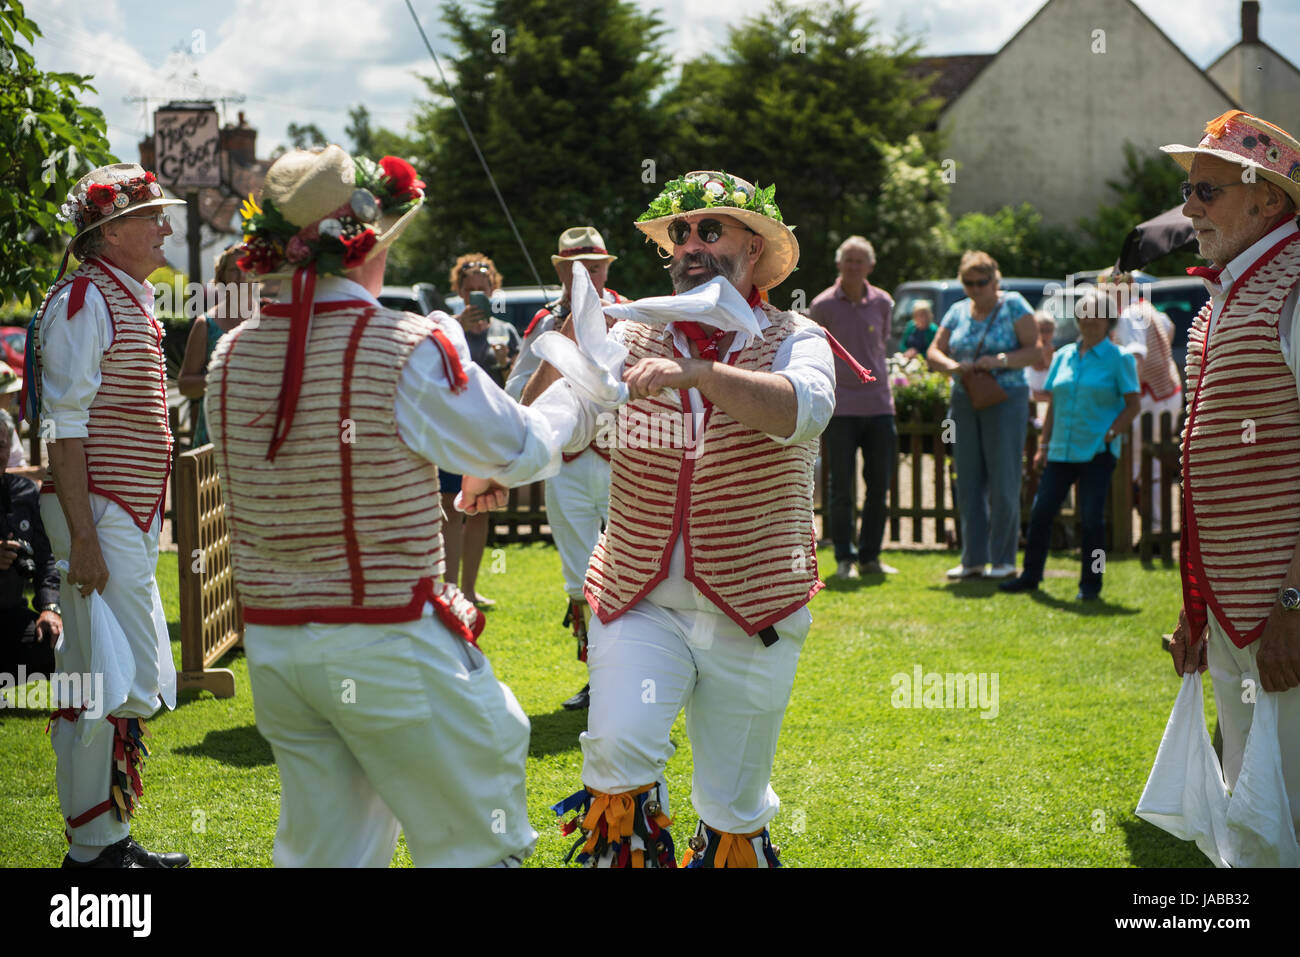 Thaxted Morris Weekend 3-4 June 2017 A meeting of member clubs of the Morris Ring celebrating the 90th anniversary of the founding of the Thaxted Morris Dancing side or team in Thaxted, North West Essex, England UK.  The Thaxted Morris side dancing and drinking beer at The Horse and Groom pub at Cornish Hall End, Essex. Hundred of Morris dancers from the UK and this year the Silkeborg side from Denmark spend most of Saturday dance outside pubs in nearby villages where much beer is consumed. In the late afternoon all the sides congregate in Thaxted where massed dancing is perfomed along Town St Stock Photo